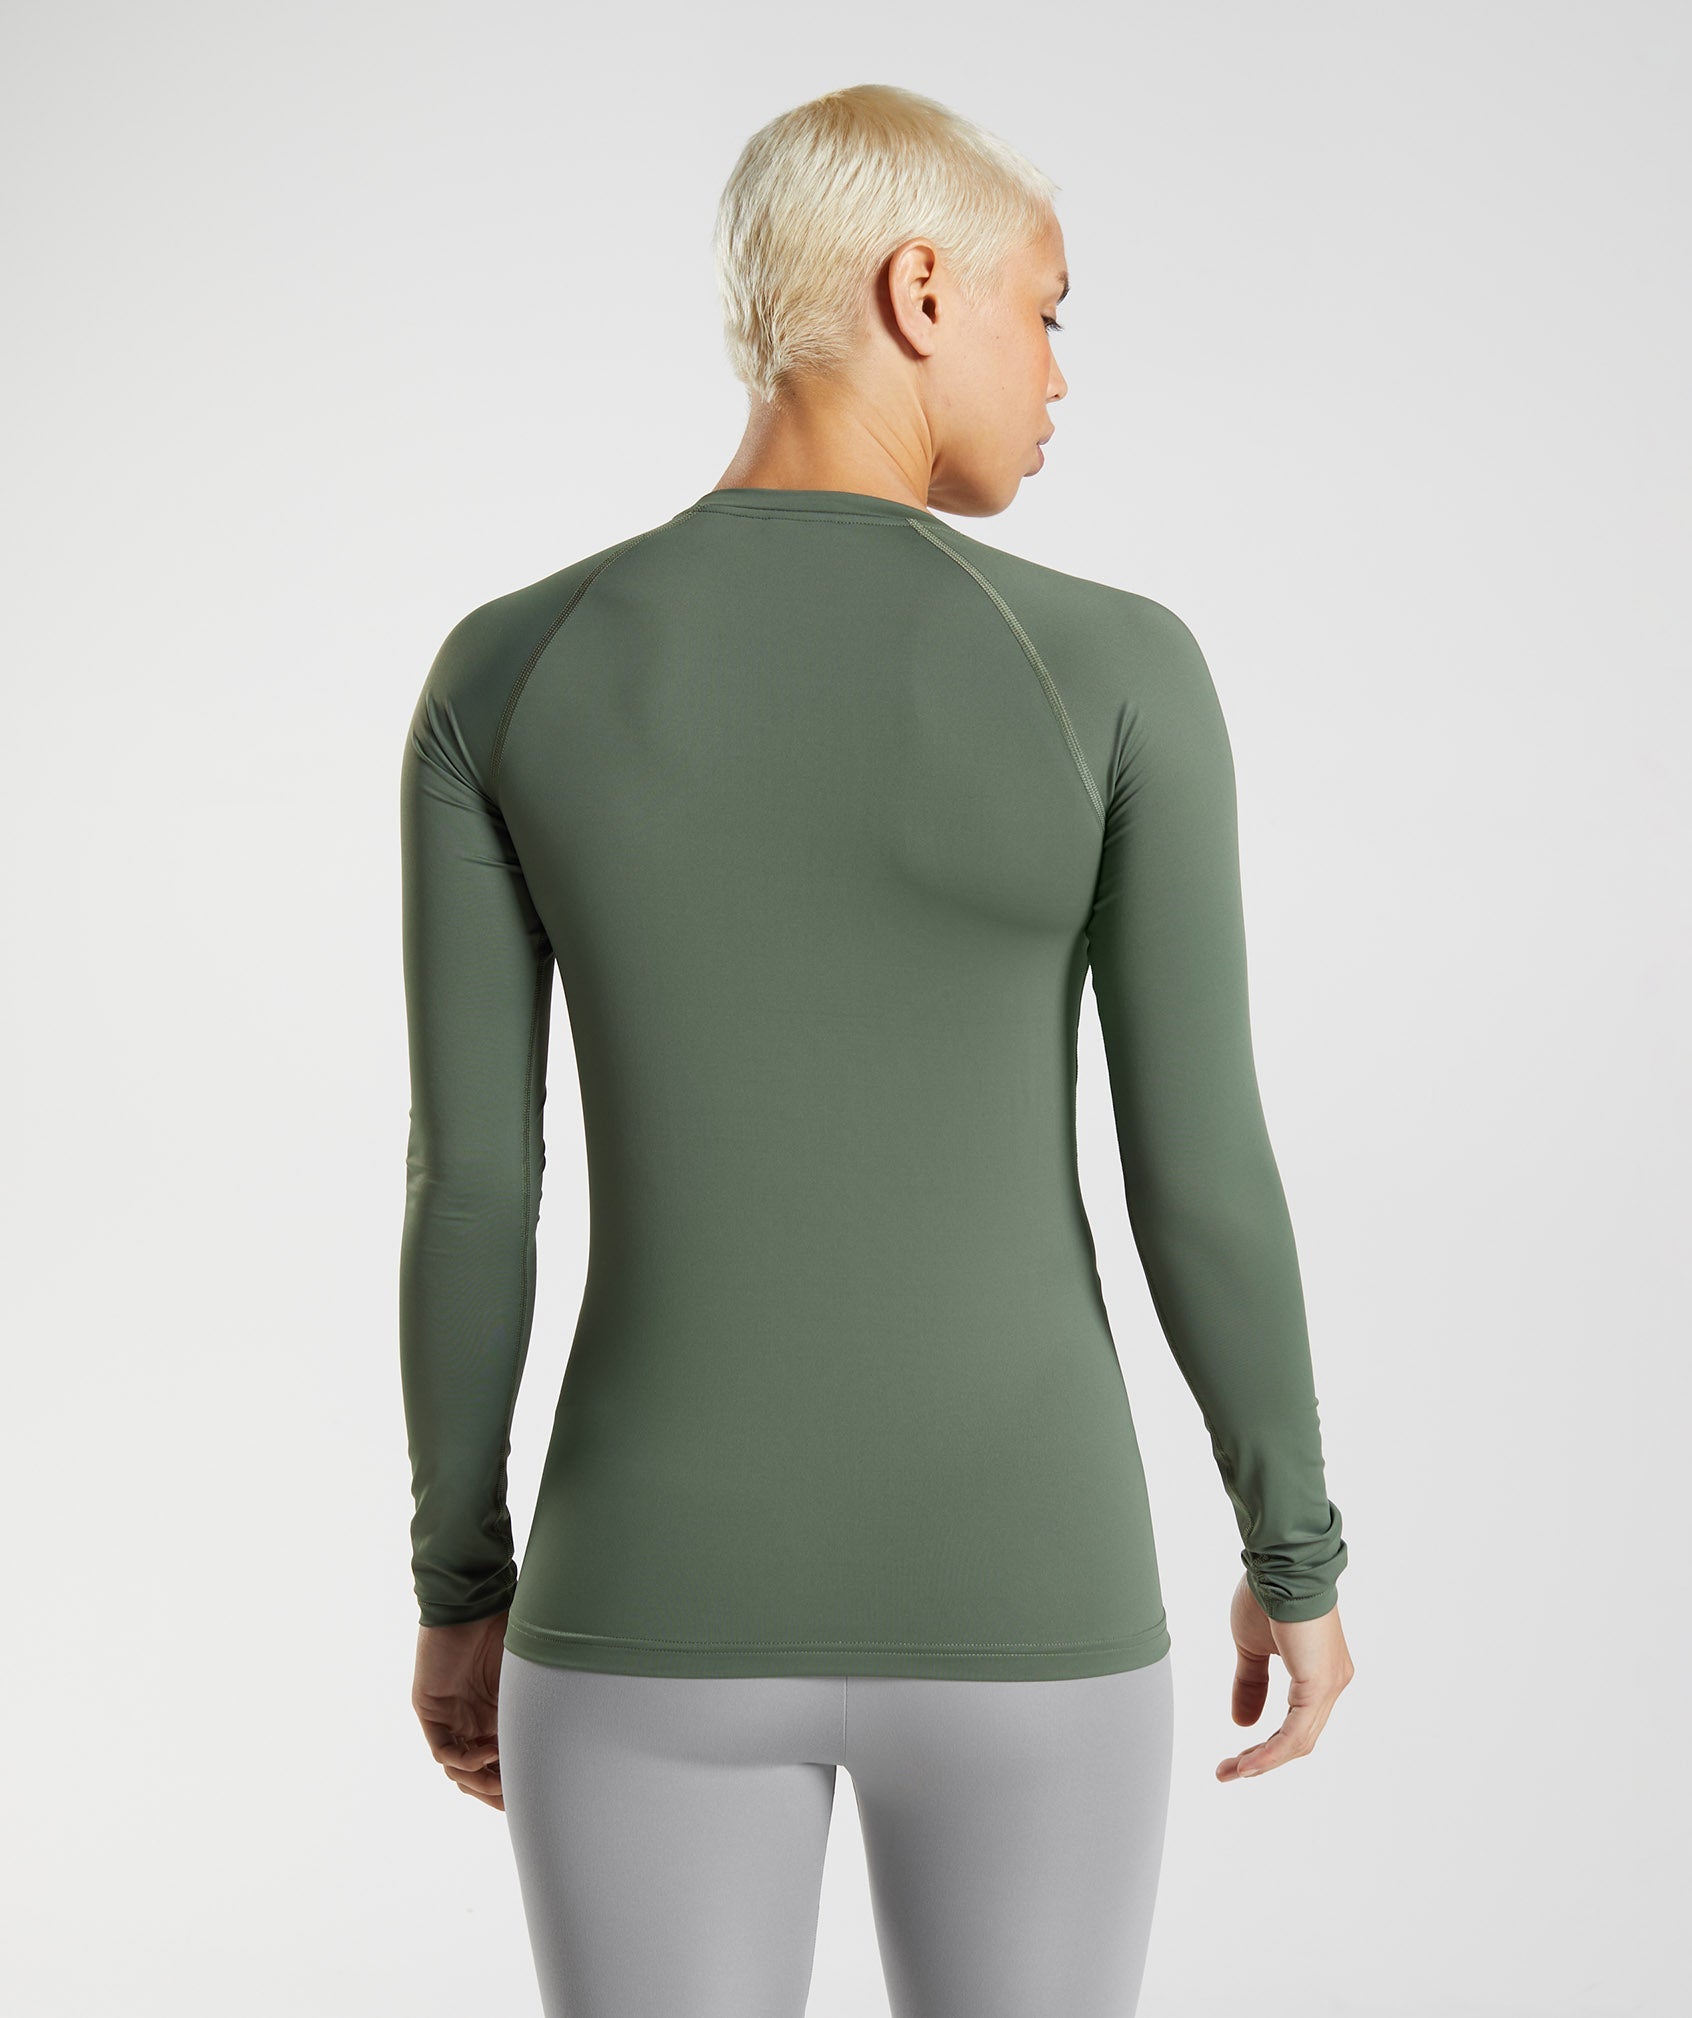 Training Baselayer Long Sleeve Top in Core Olive - view 2